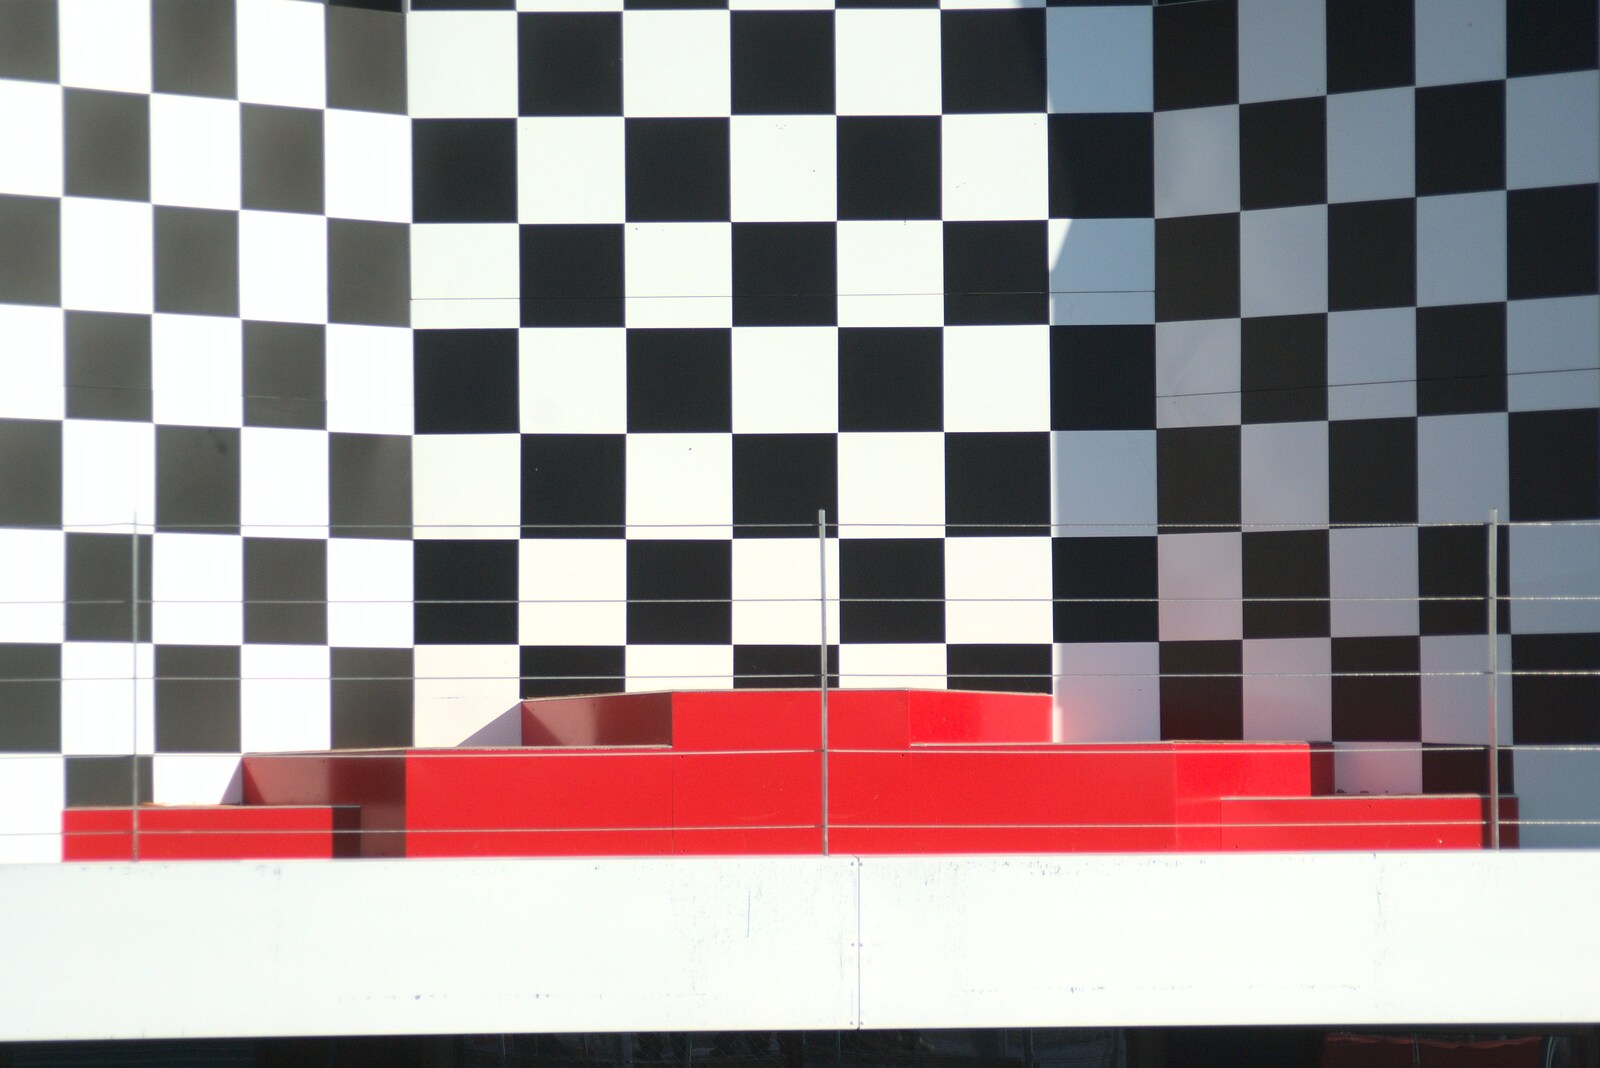 The Formula 1 winner's podium from TouchType at Silverstone, Northamptonshire - 22nd October 2011